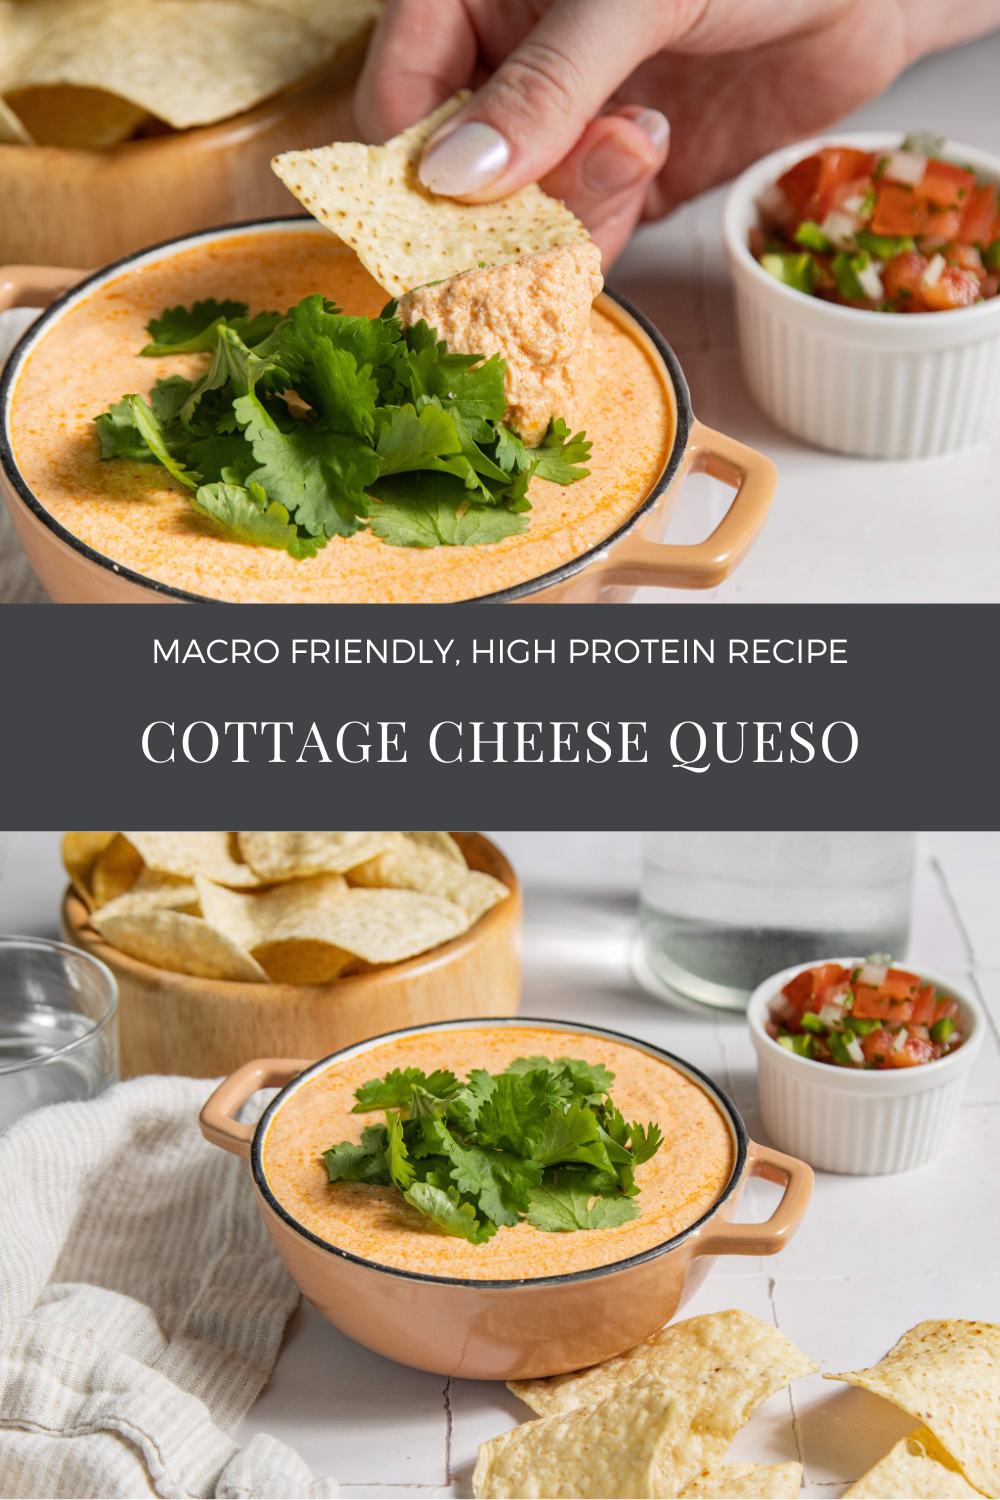 Cottage Cheese Queso Recipe